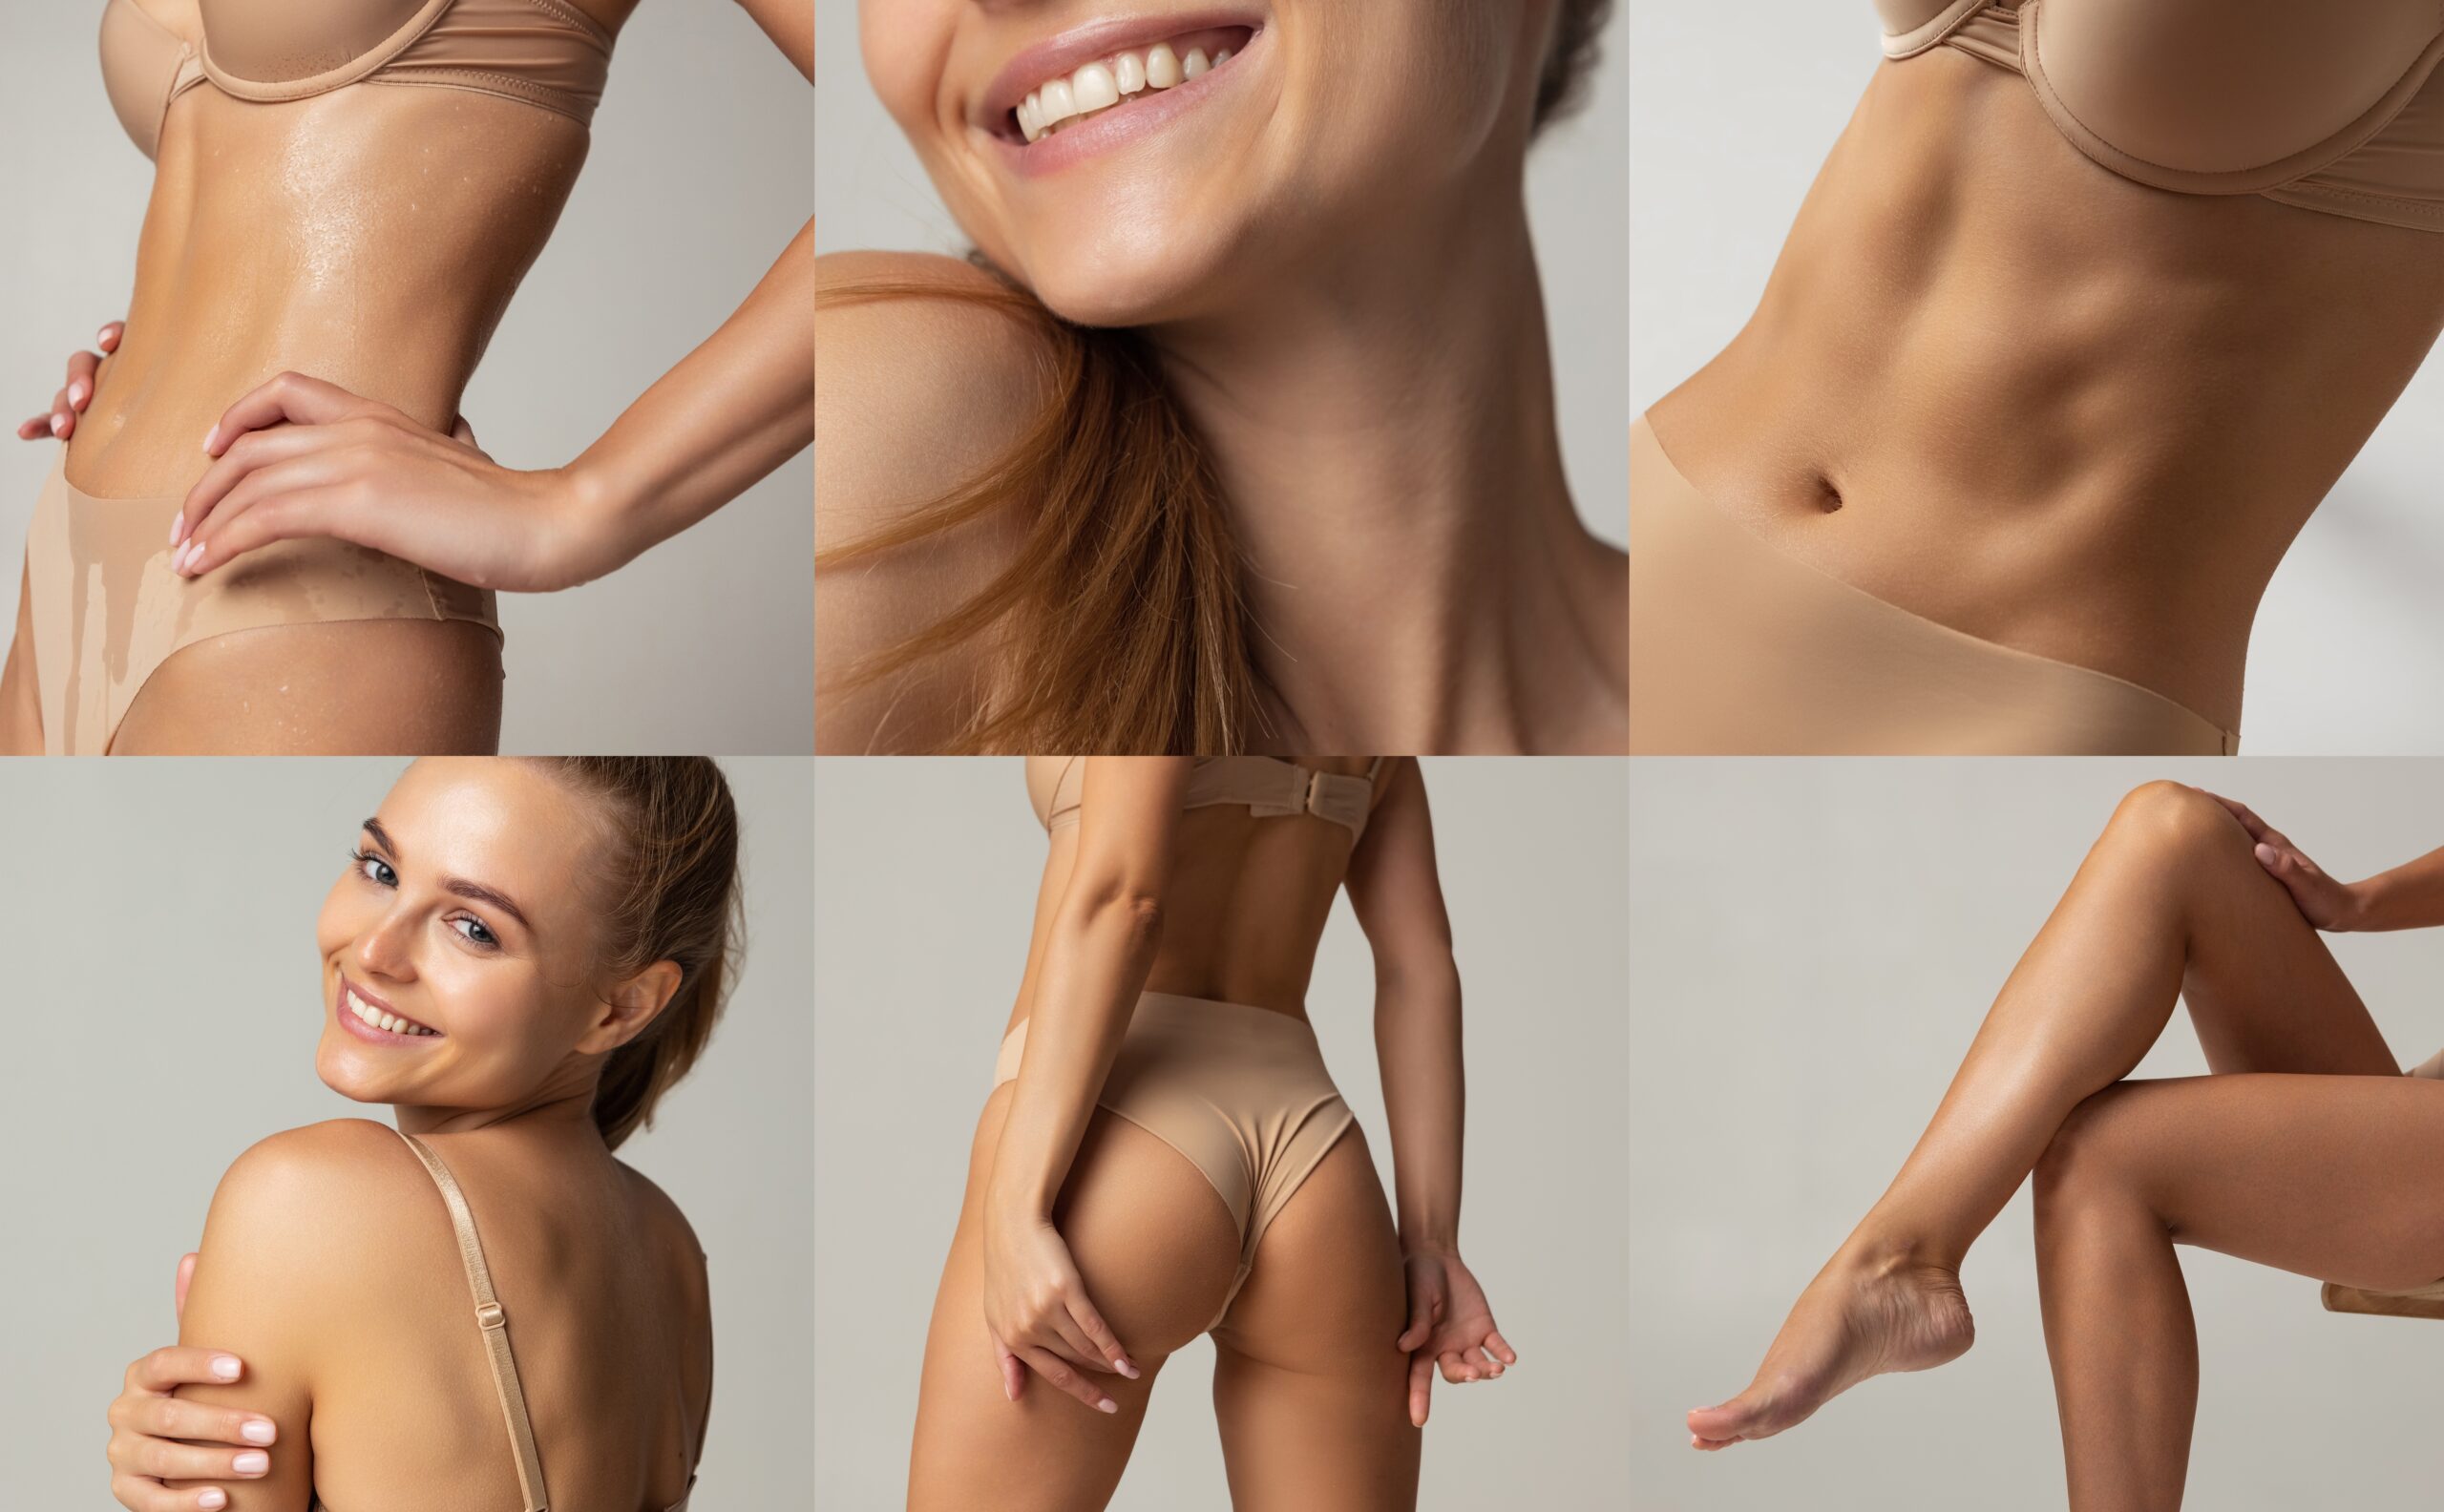 Collage,Of,Body,Parts,Of,Beautiful,Young,Slim,Woman,Posing